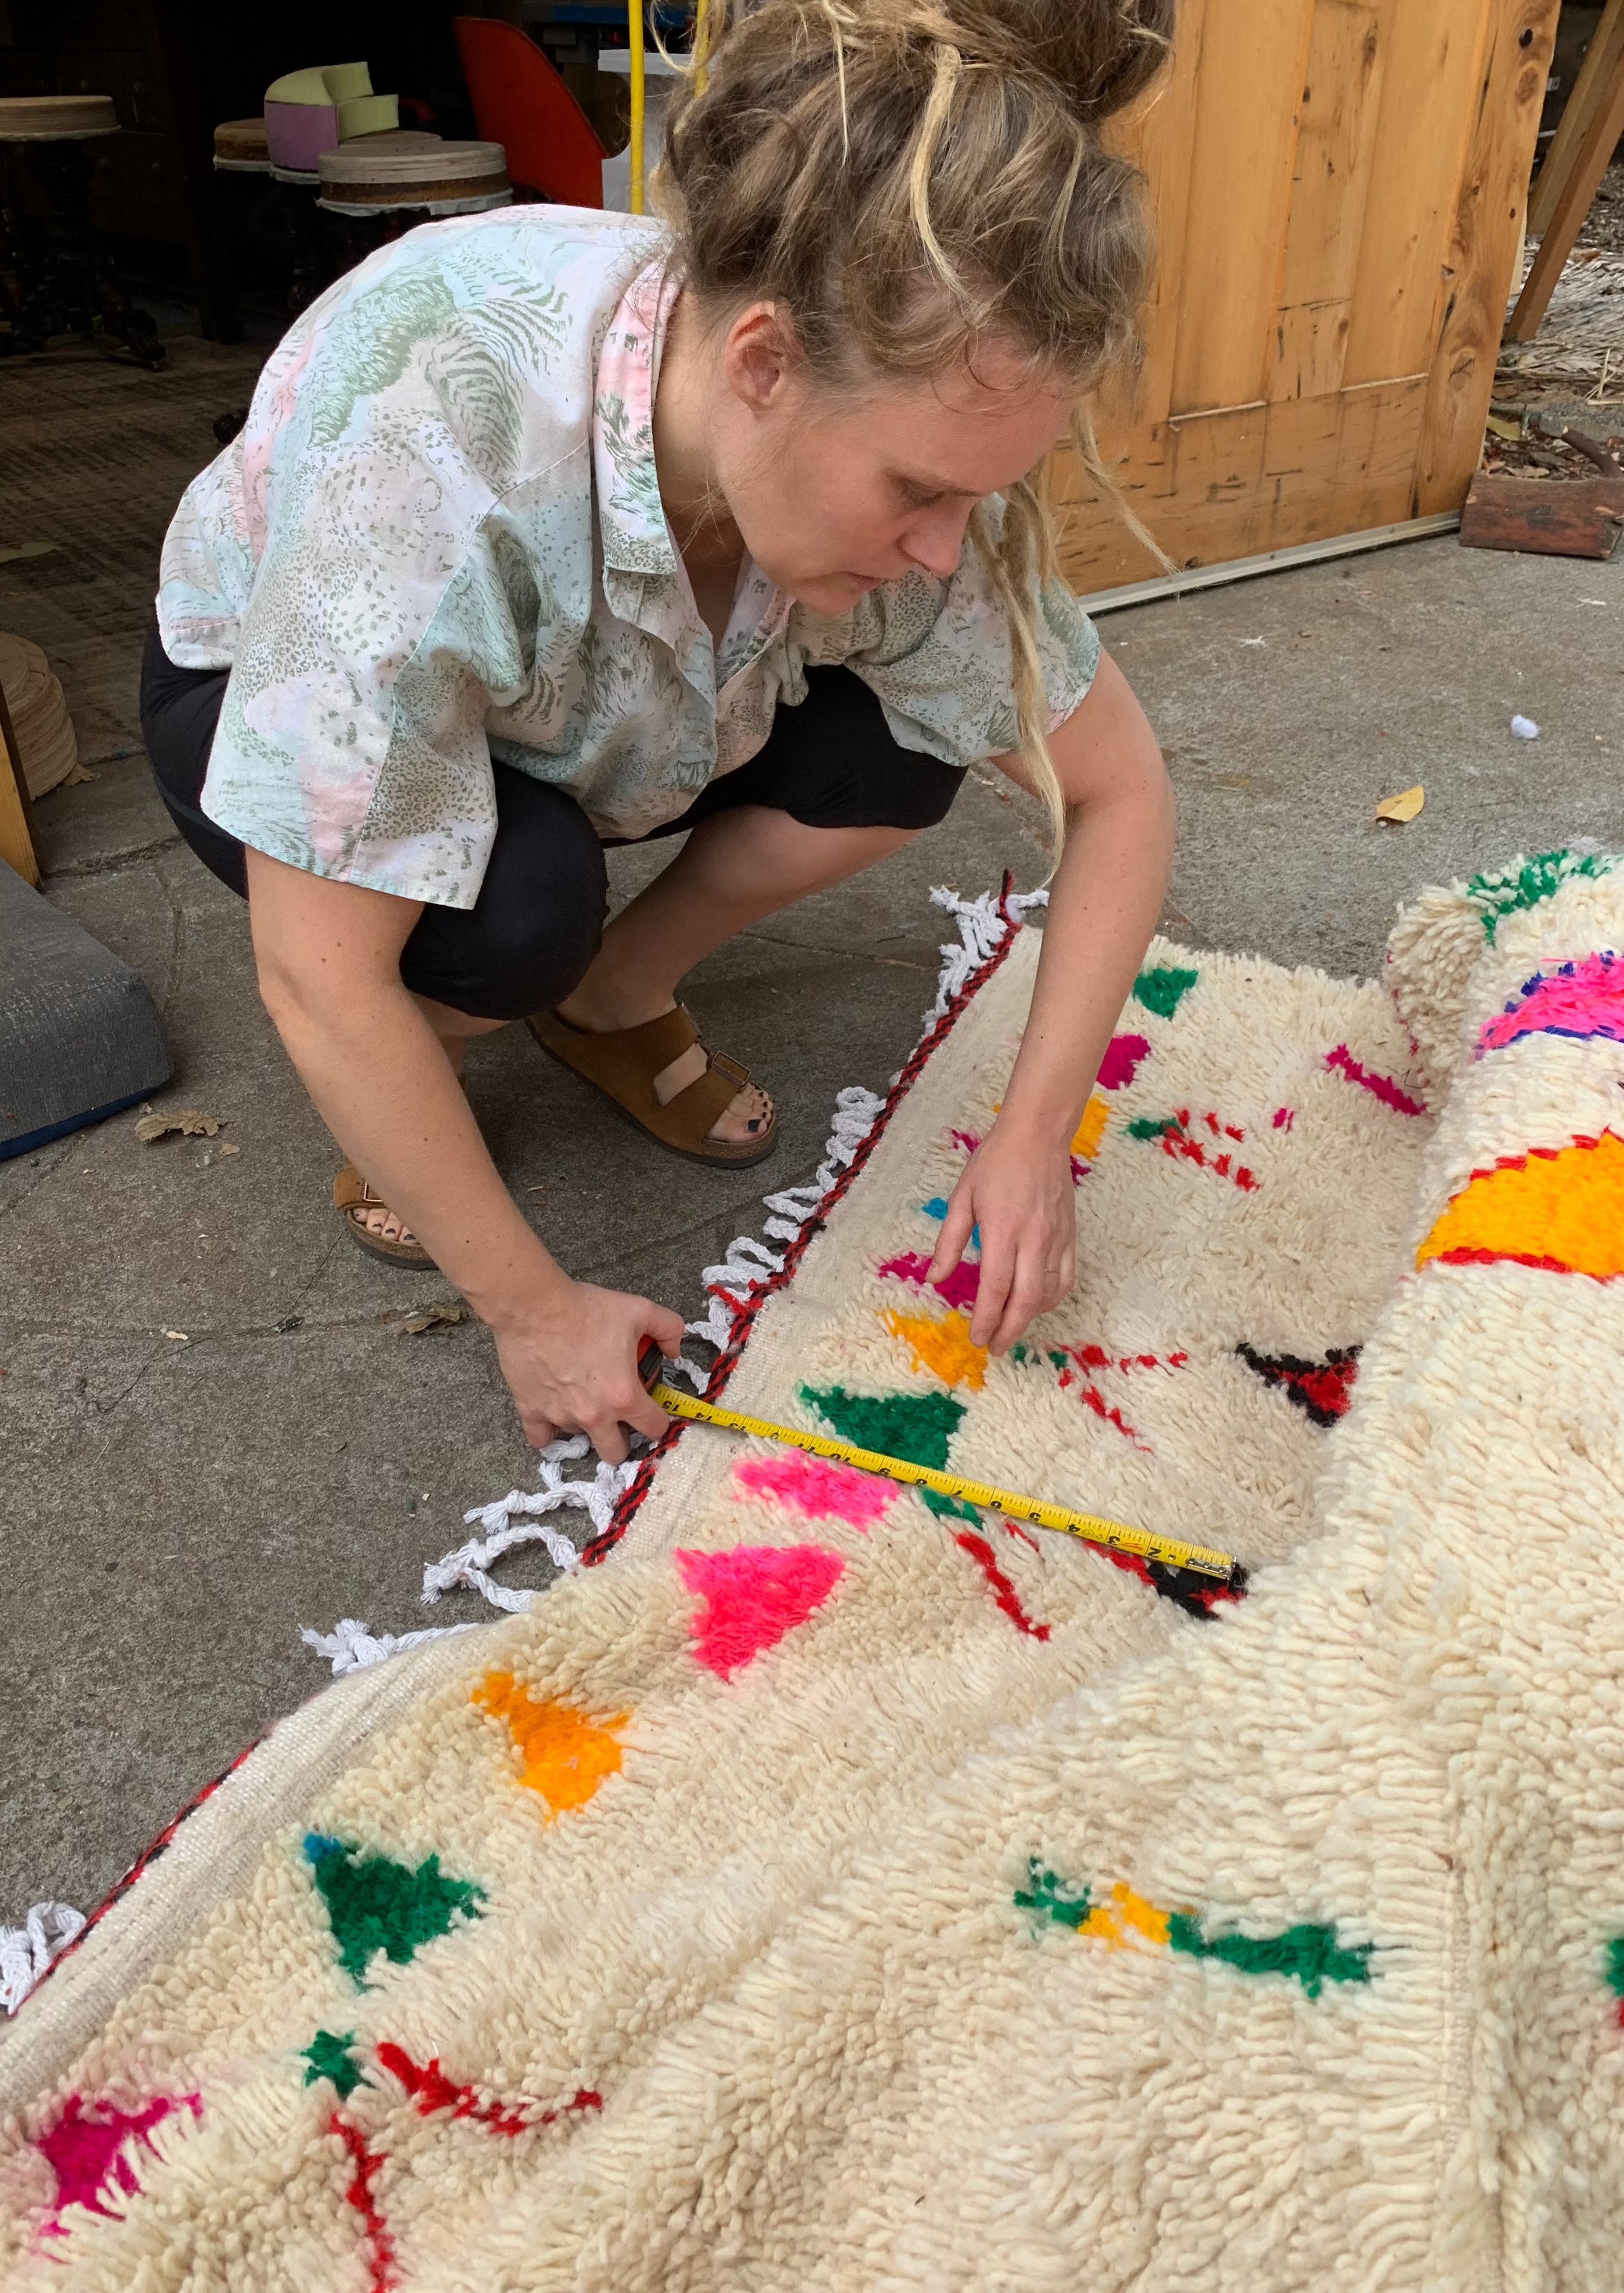 upholstery artist anne williams measures moroccan rug to prepare for upholstering the chaise lounge. french artist now works from her studio in portland oregon 